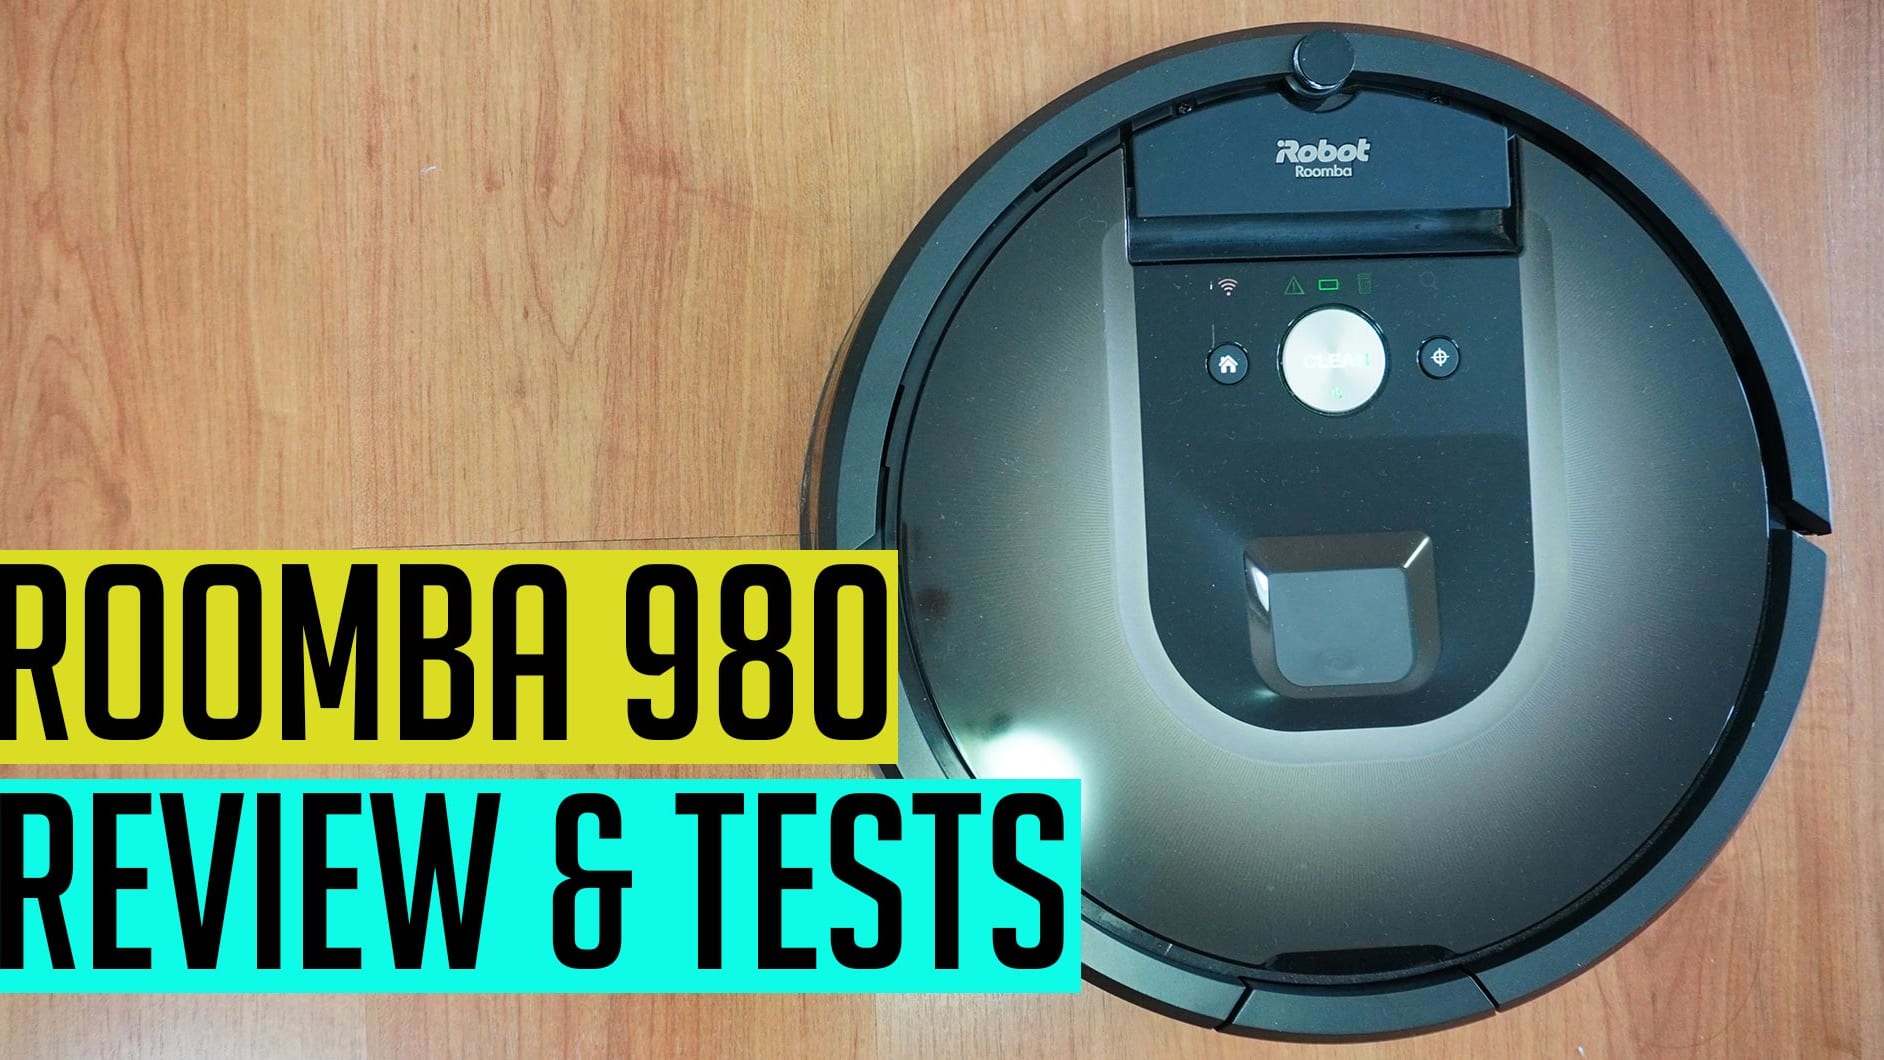 Roomba 980 Review [Is It Worth The